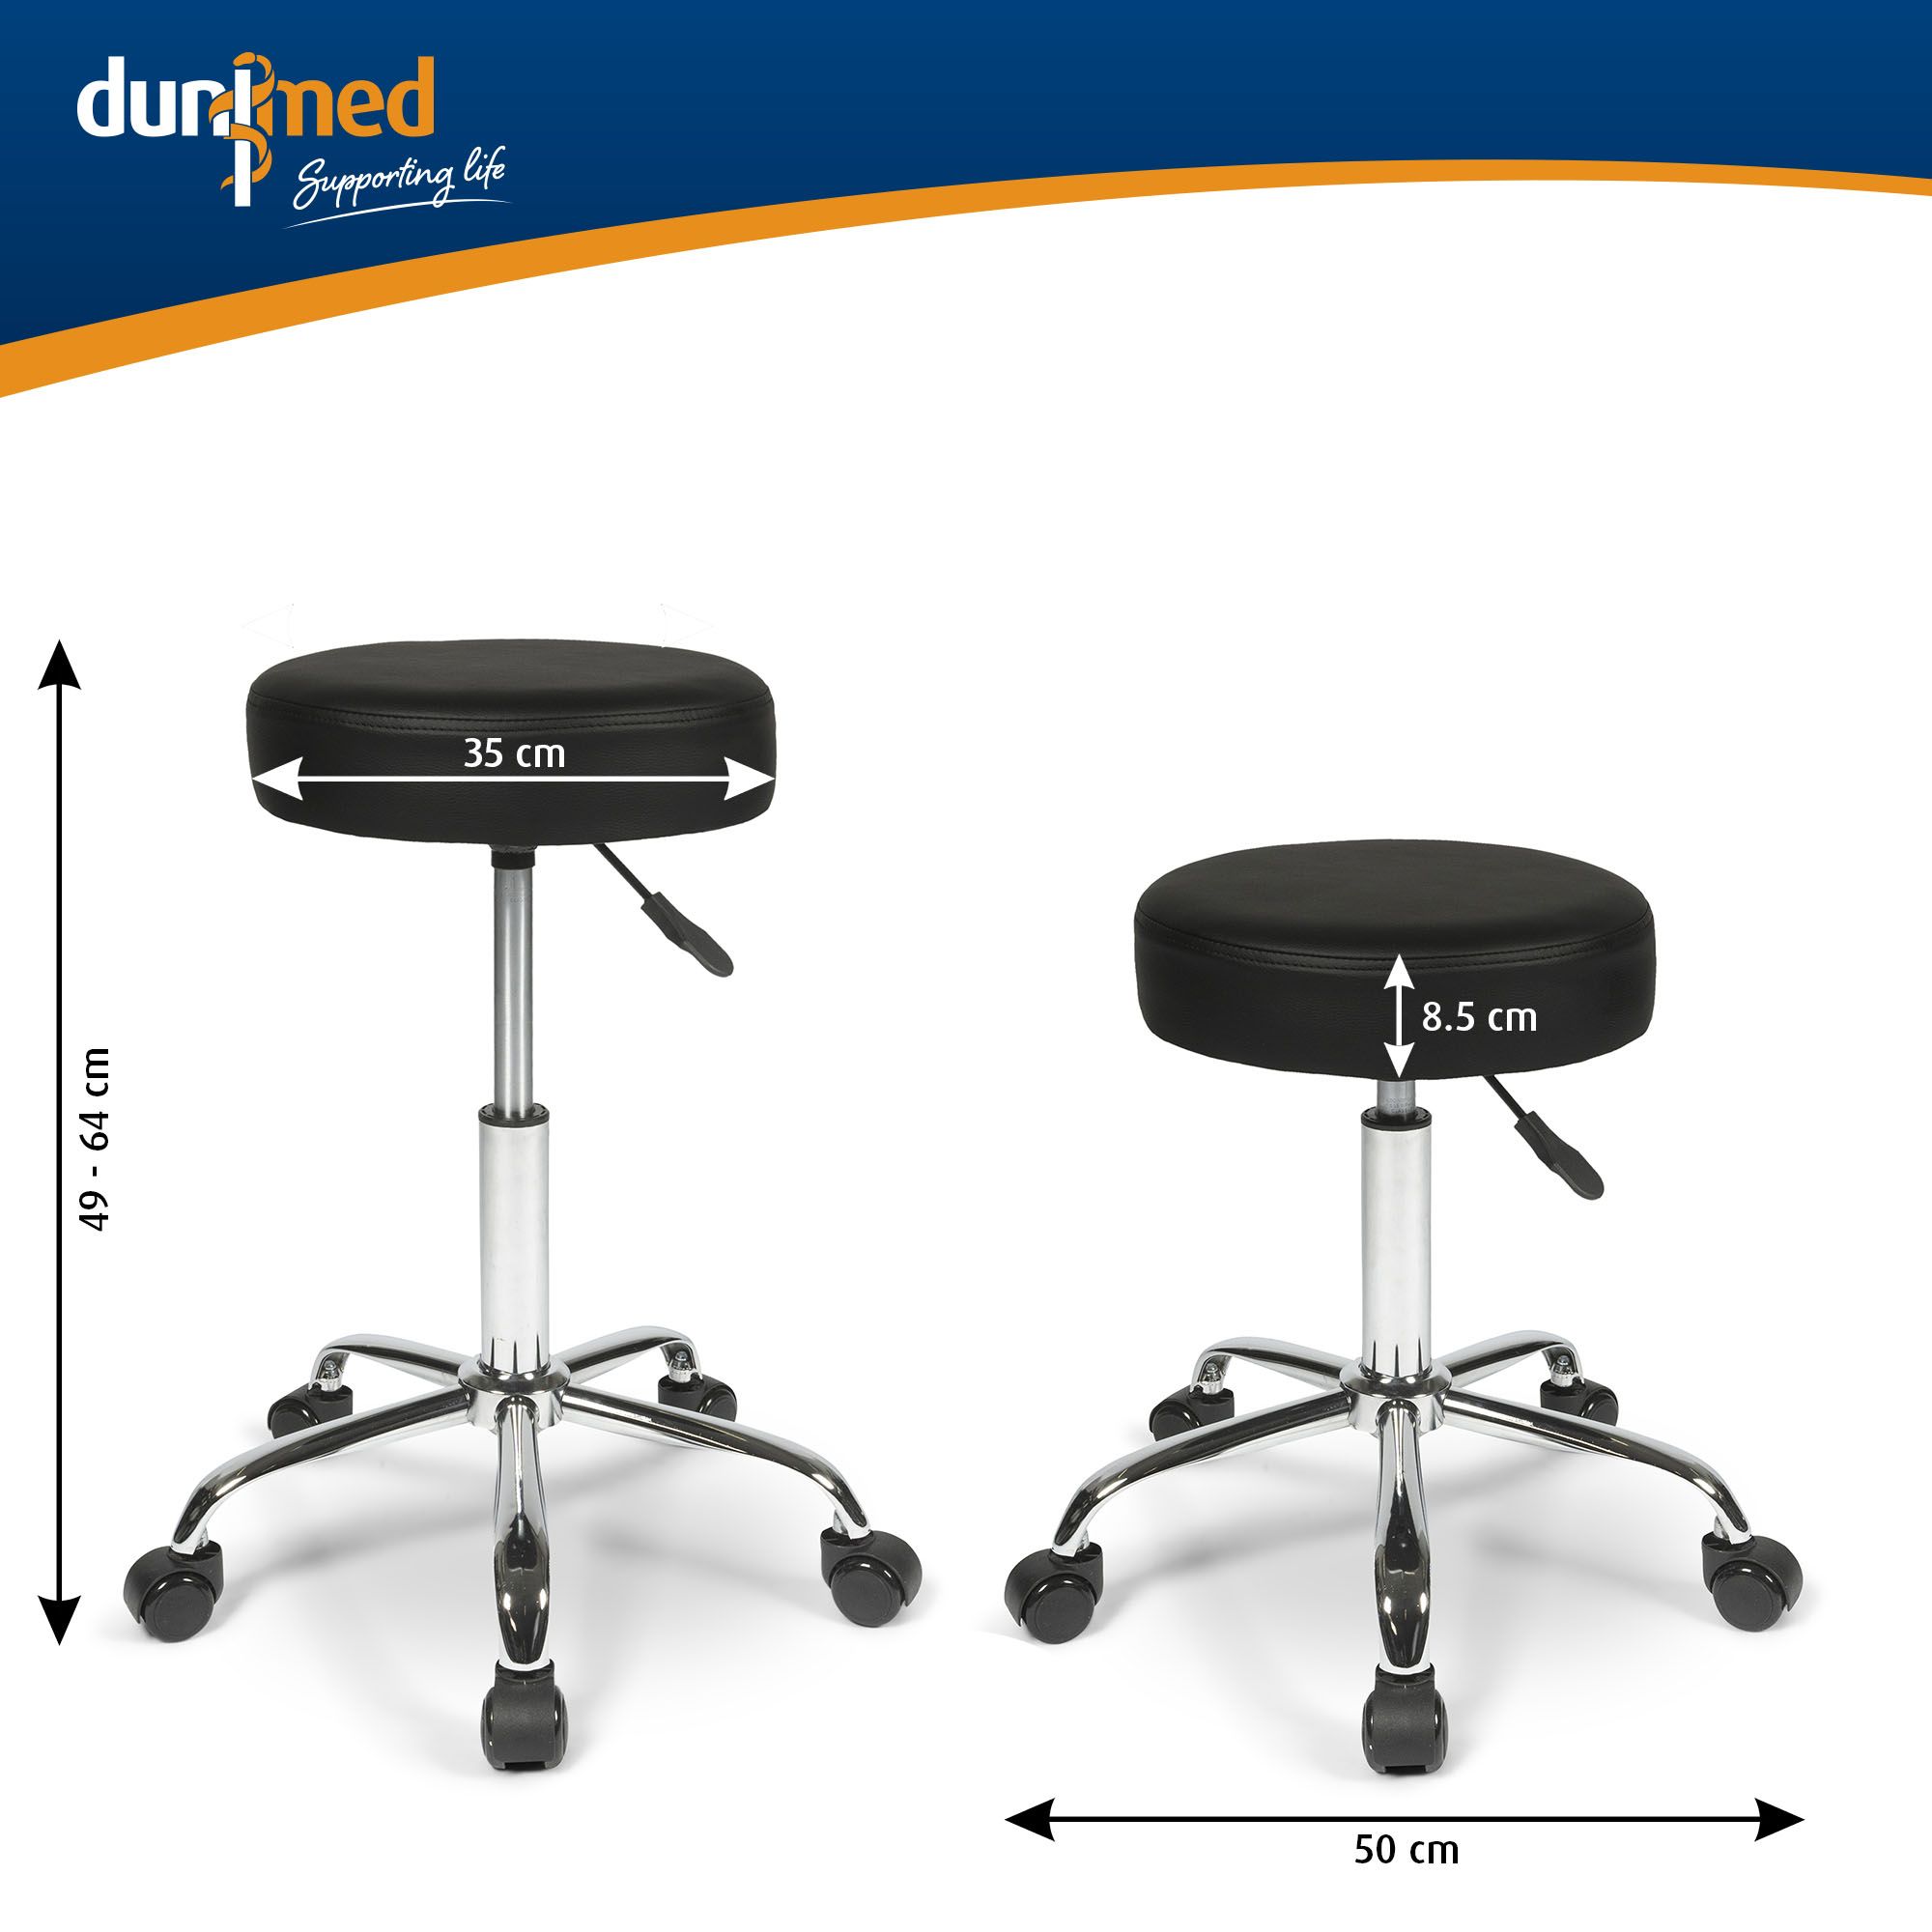 dunimed work stool with wheels size chart